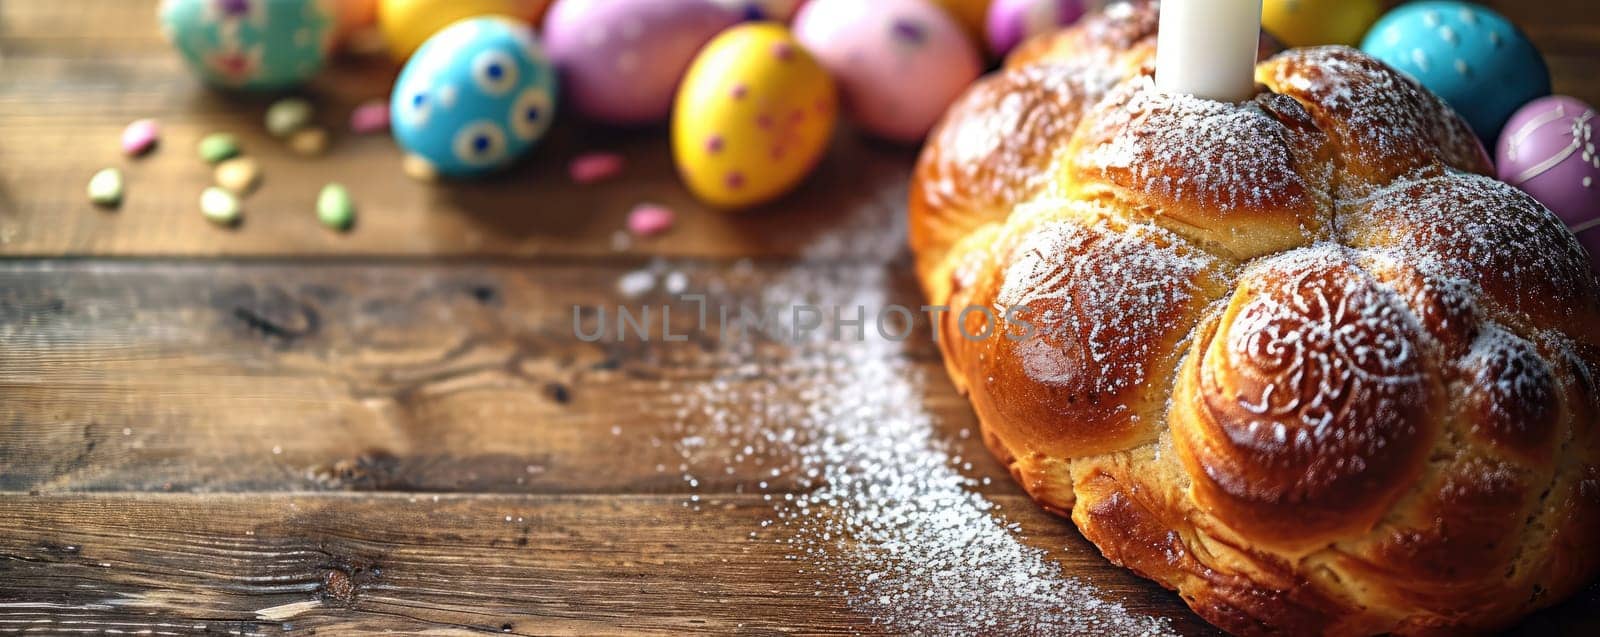 Traditional Easter cake with painted eggs on wooden background, symbolizing the Resurrection Feast